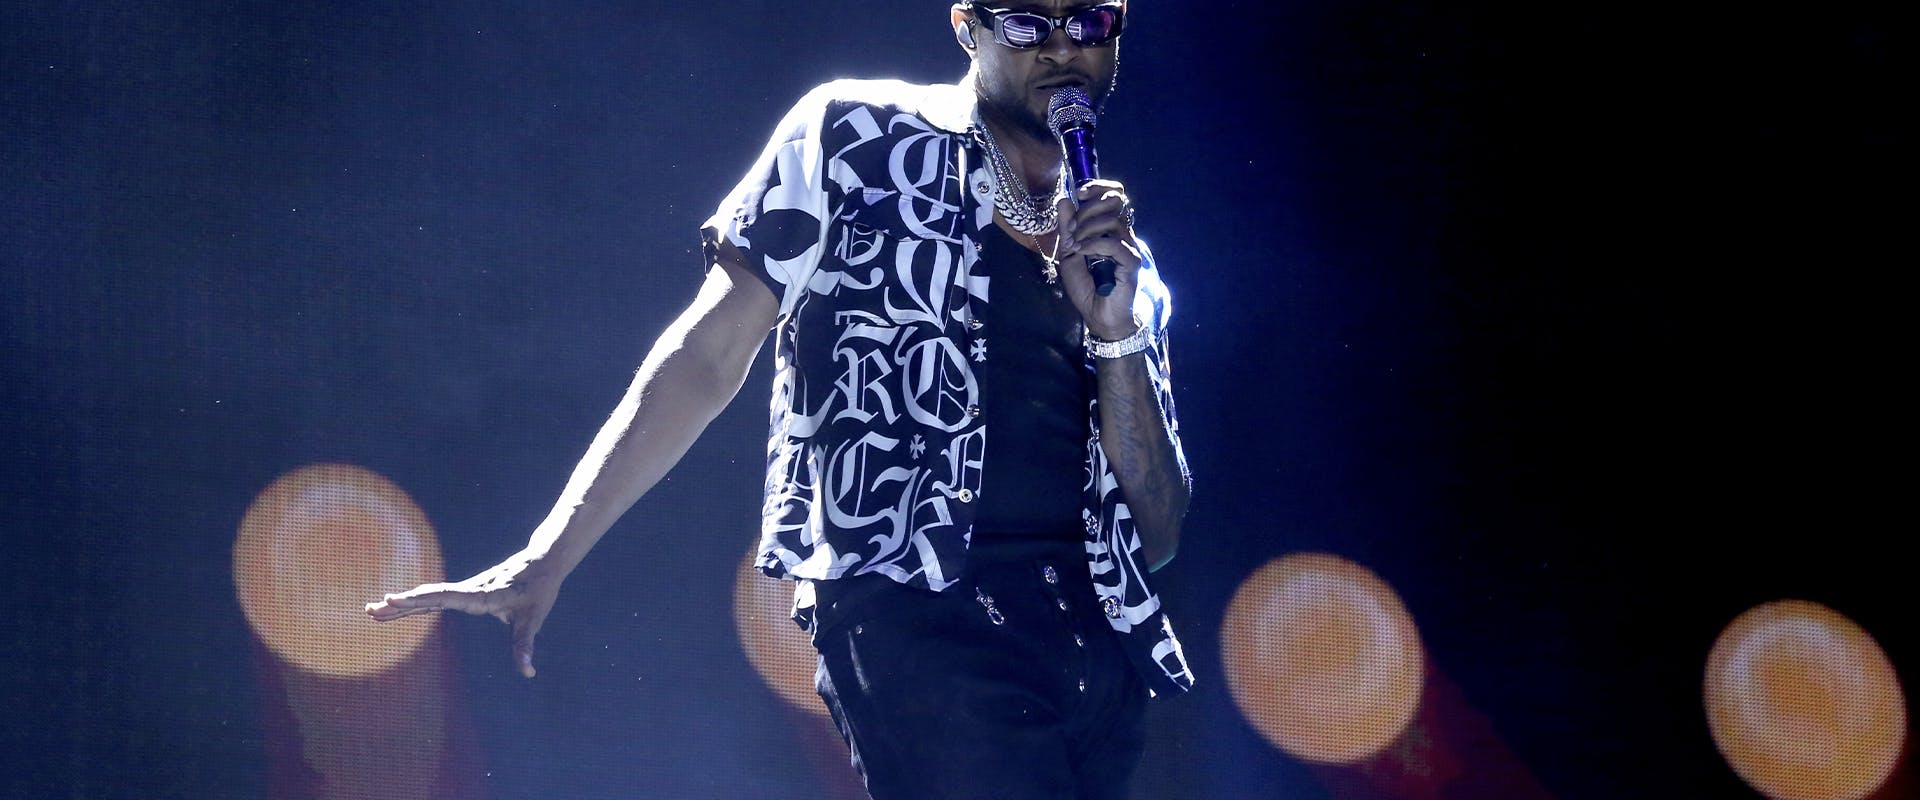 Singer/songwriter Usher performs during the 2022 Lovers & Friends music festival at the Las Vegas Festival Grounds on May 15, 2022 in Las Vegas, Nevada. (Photo by Gabe Ginsberg/Getty Images)